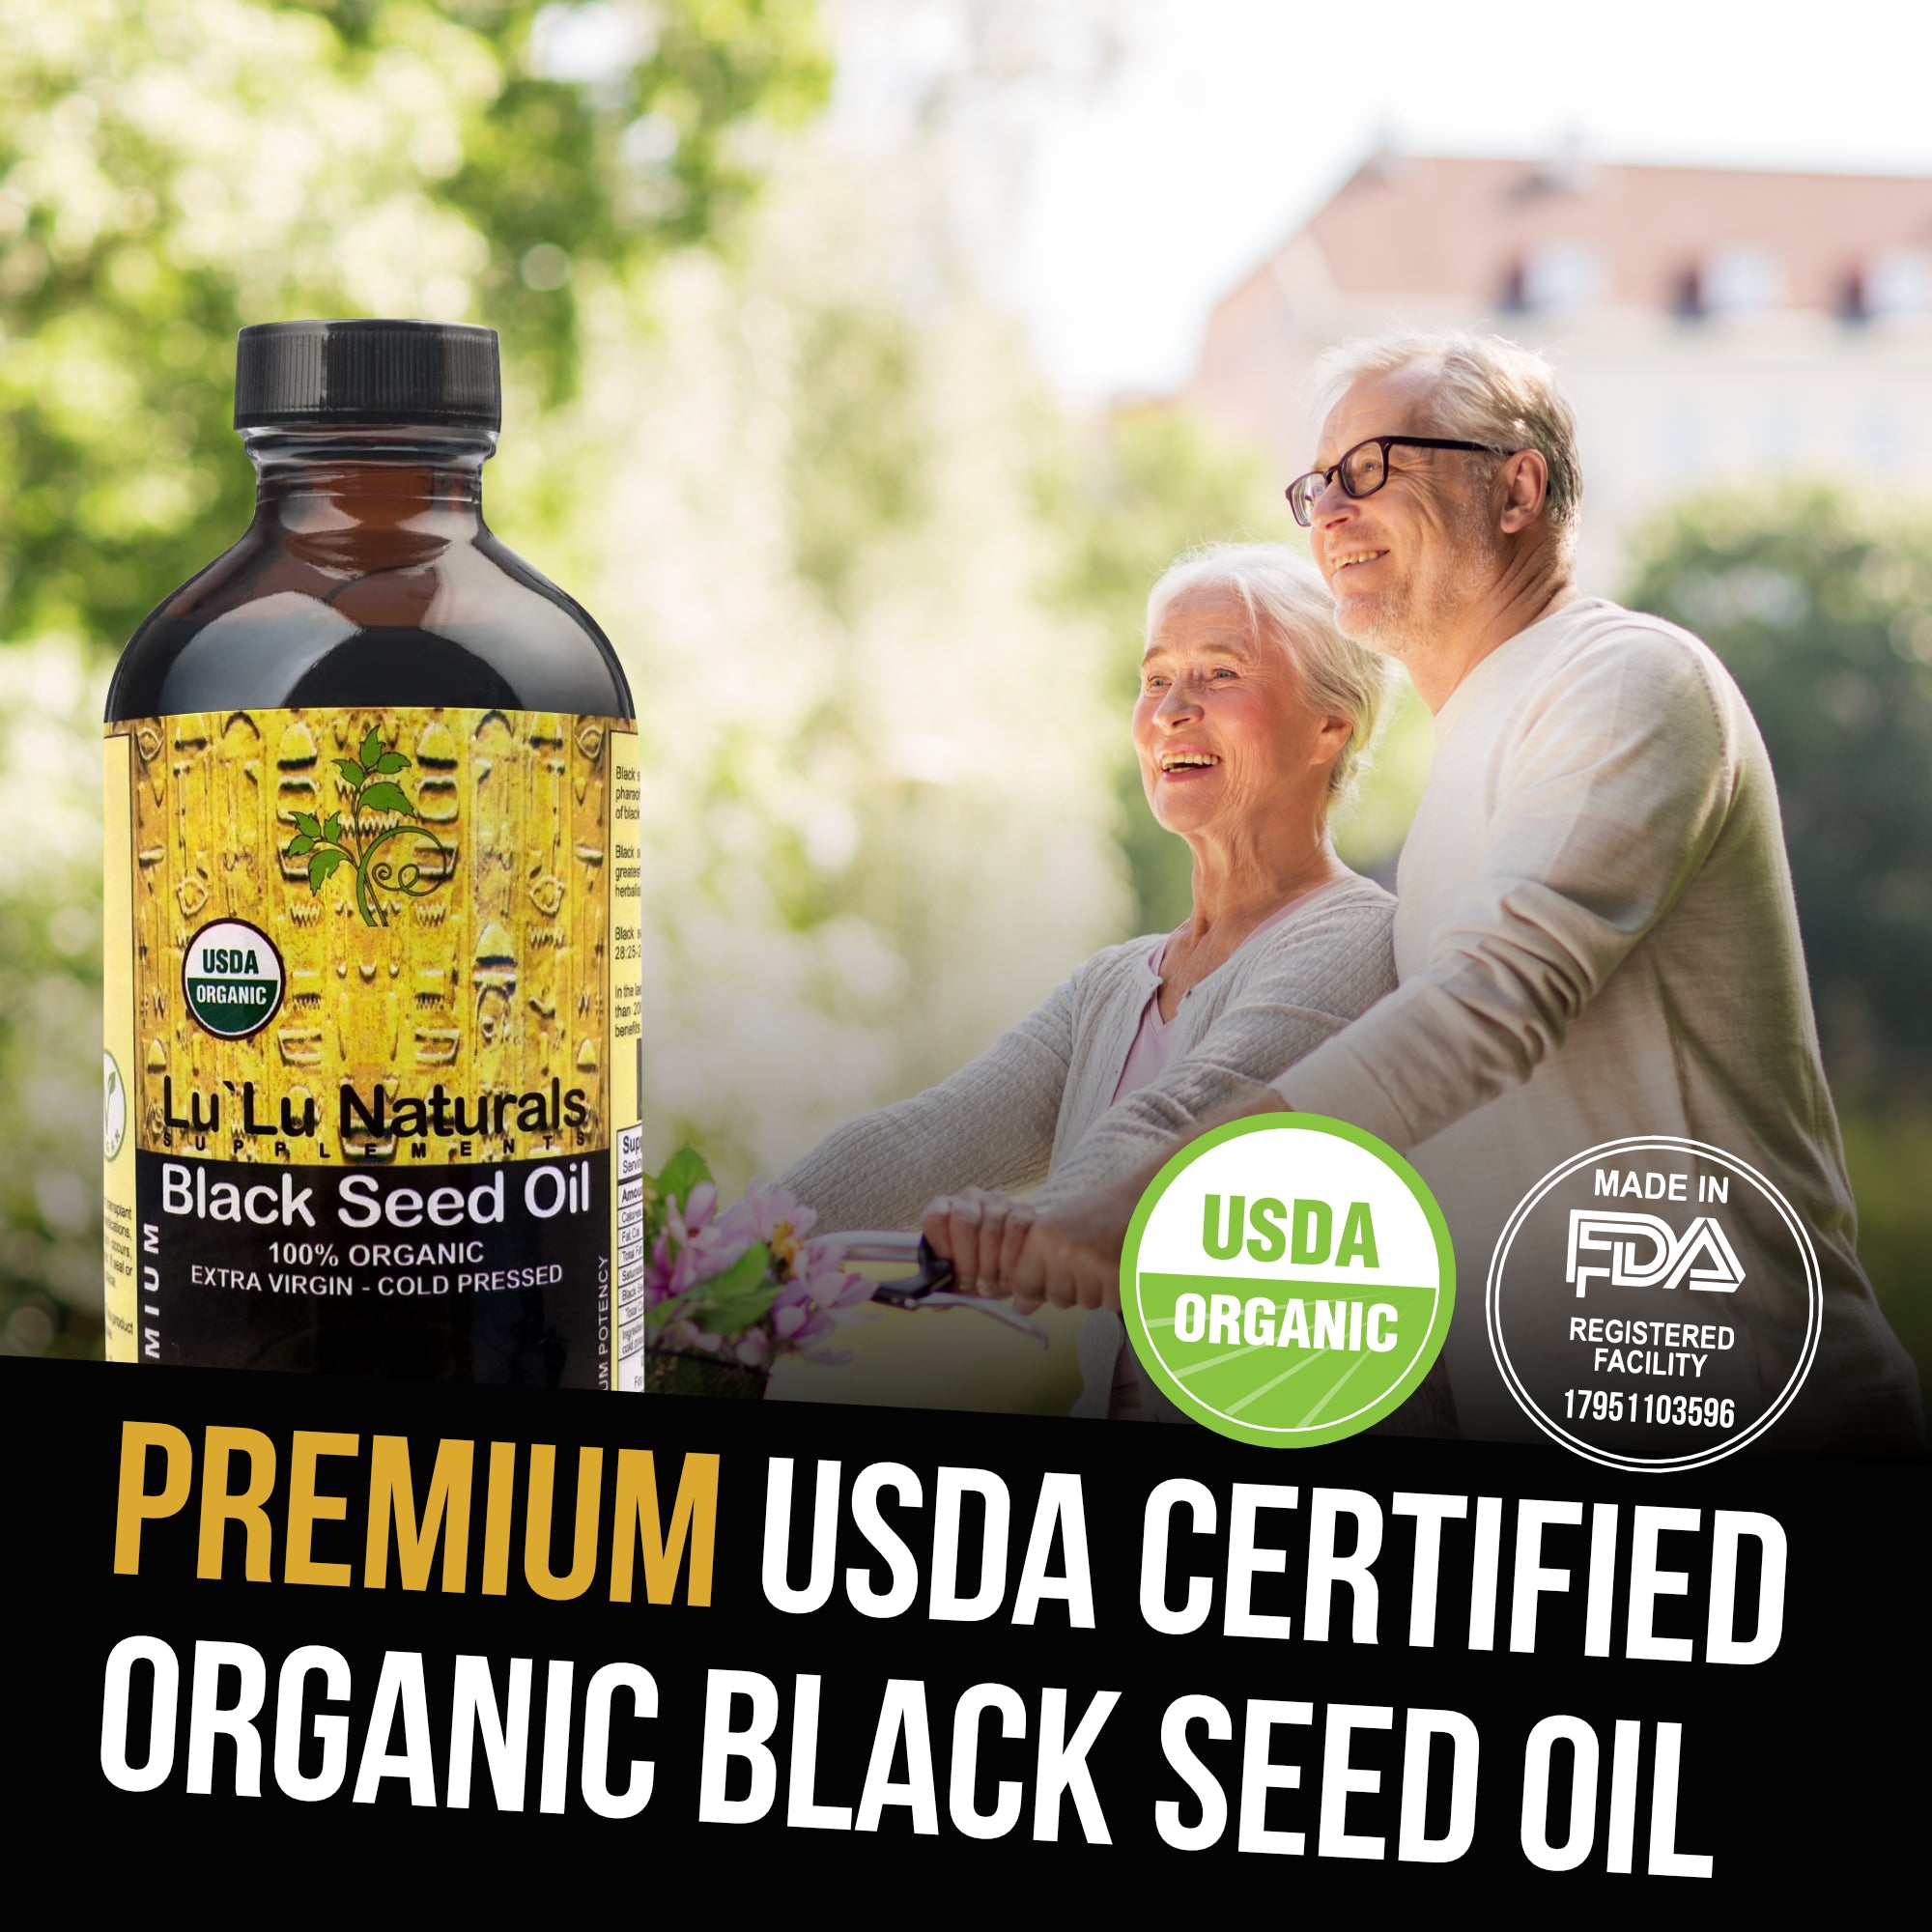 ORGANIC BLACK SEED OIL - BEST FROM NATURE JUST FOR YOU